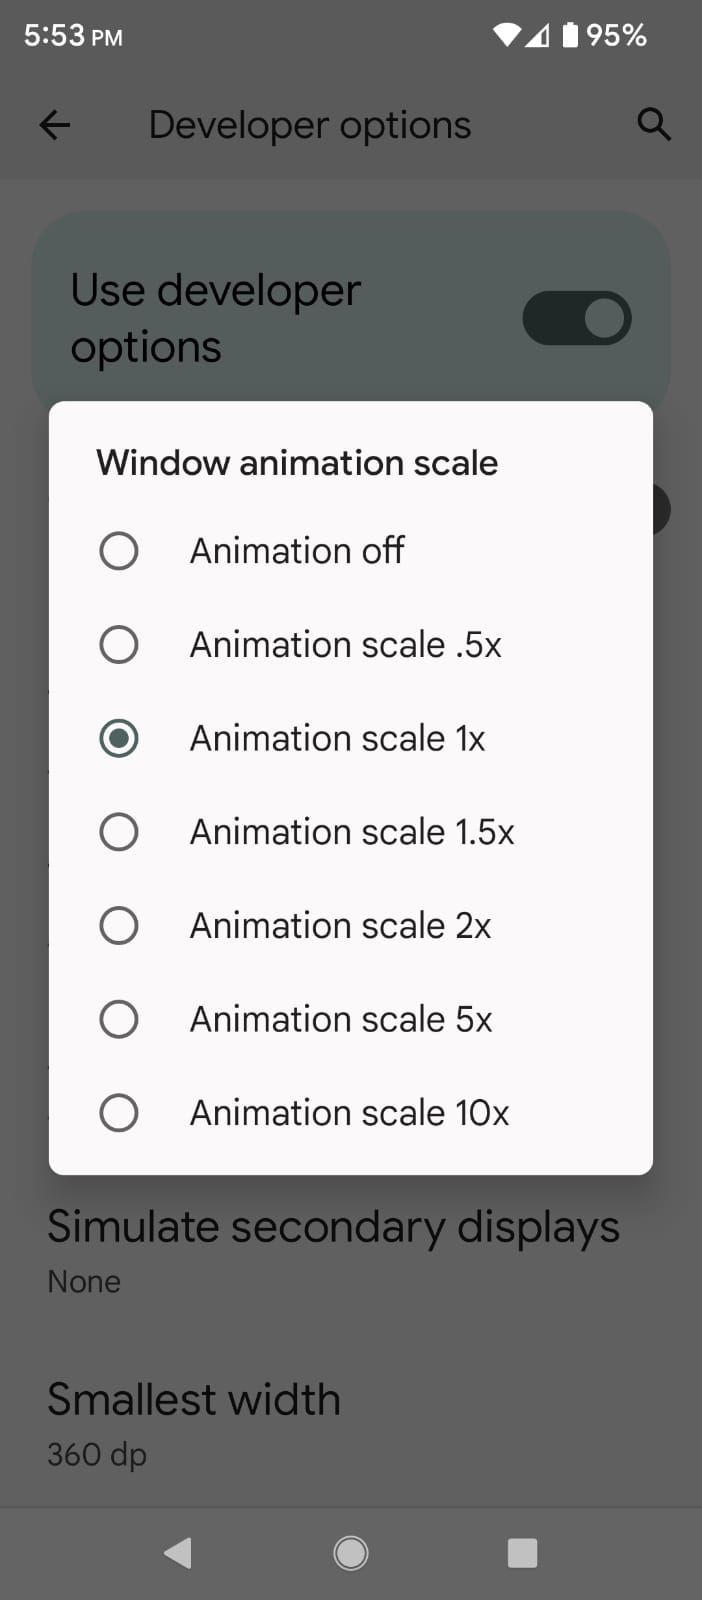 Adjusting the Animation scales in Android Developer Options